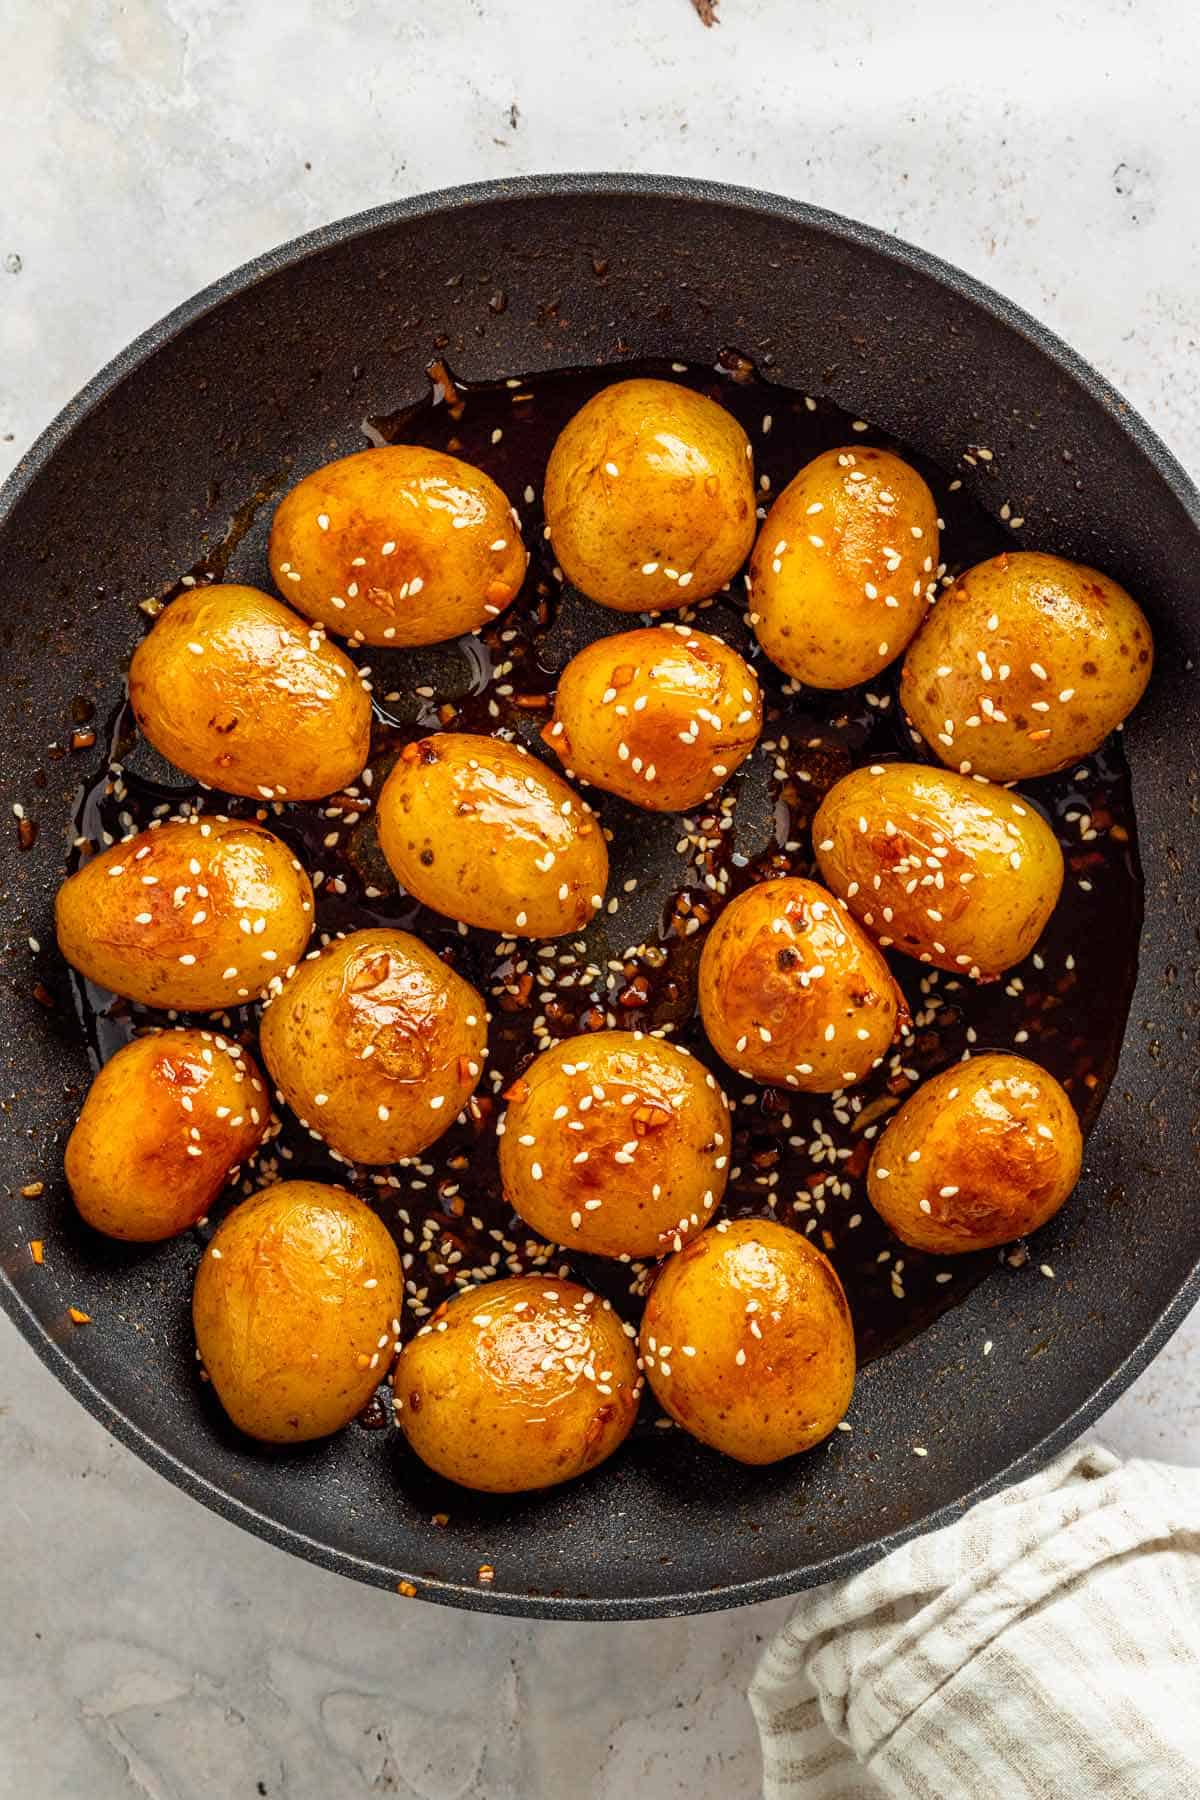 baby potatoes with dark sauce in skillet.